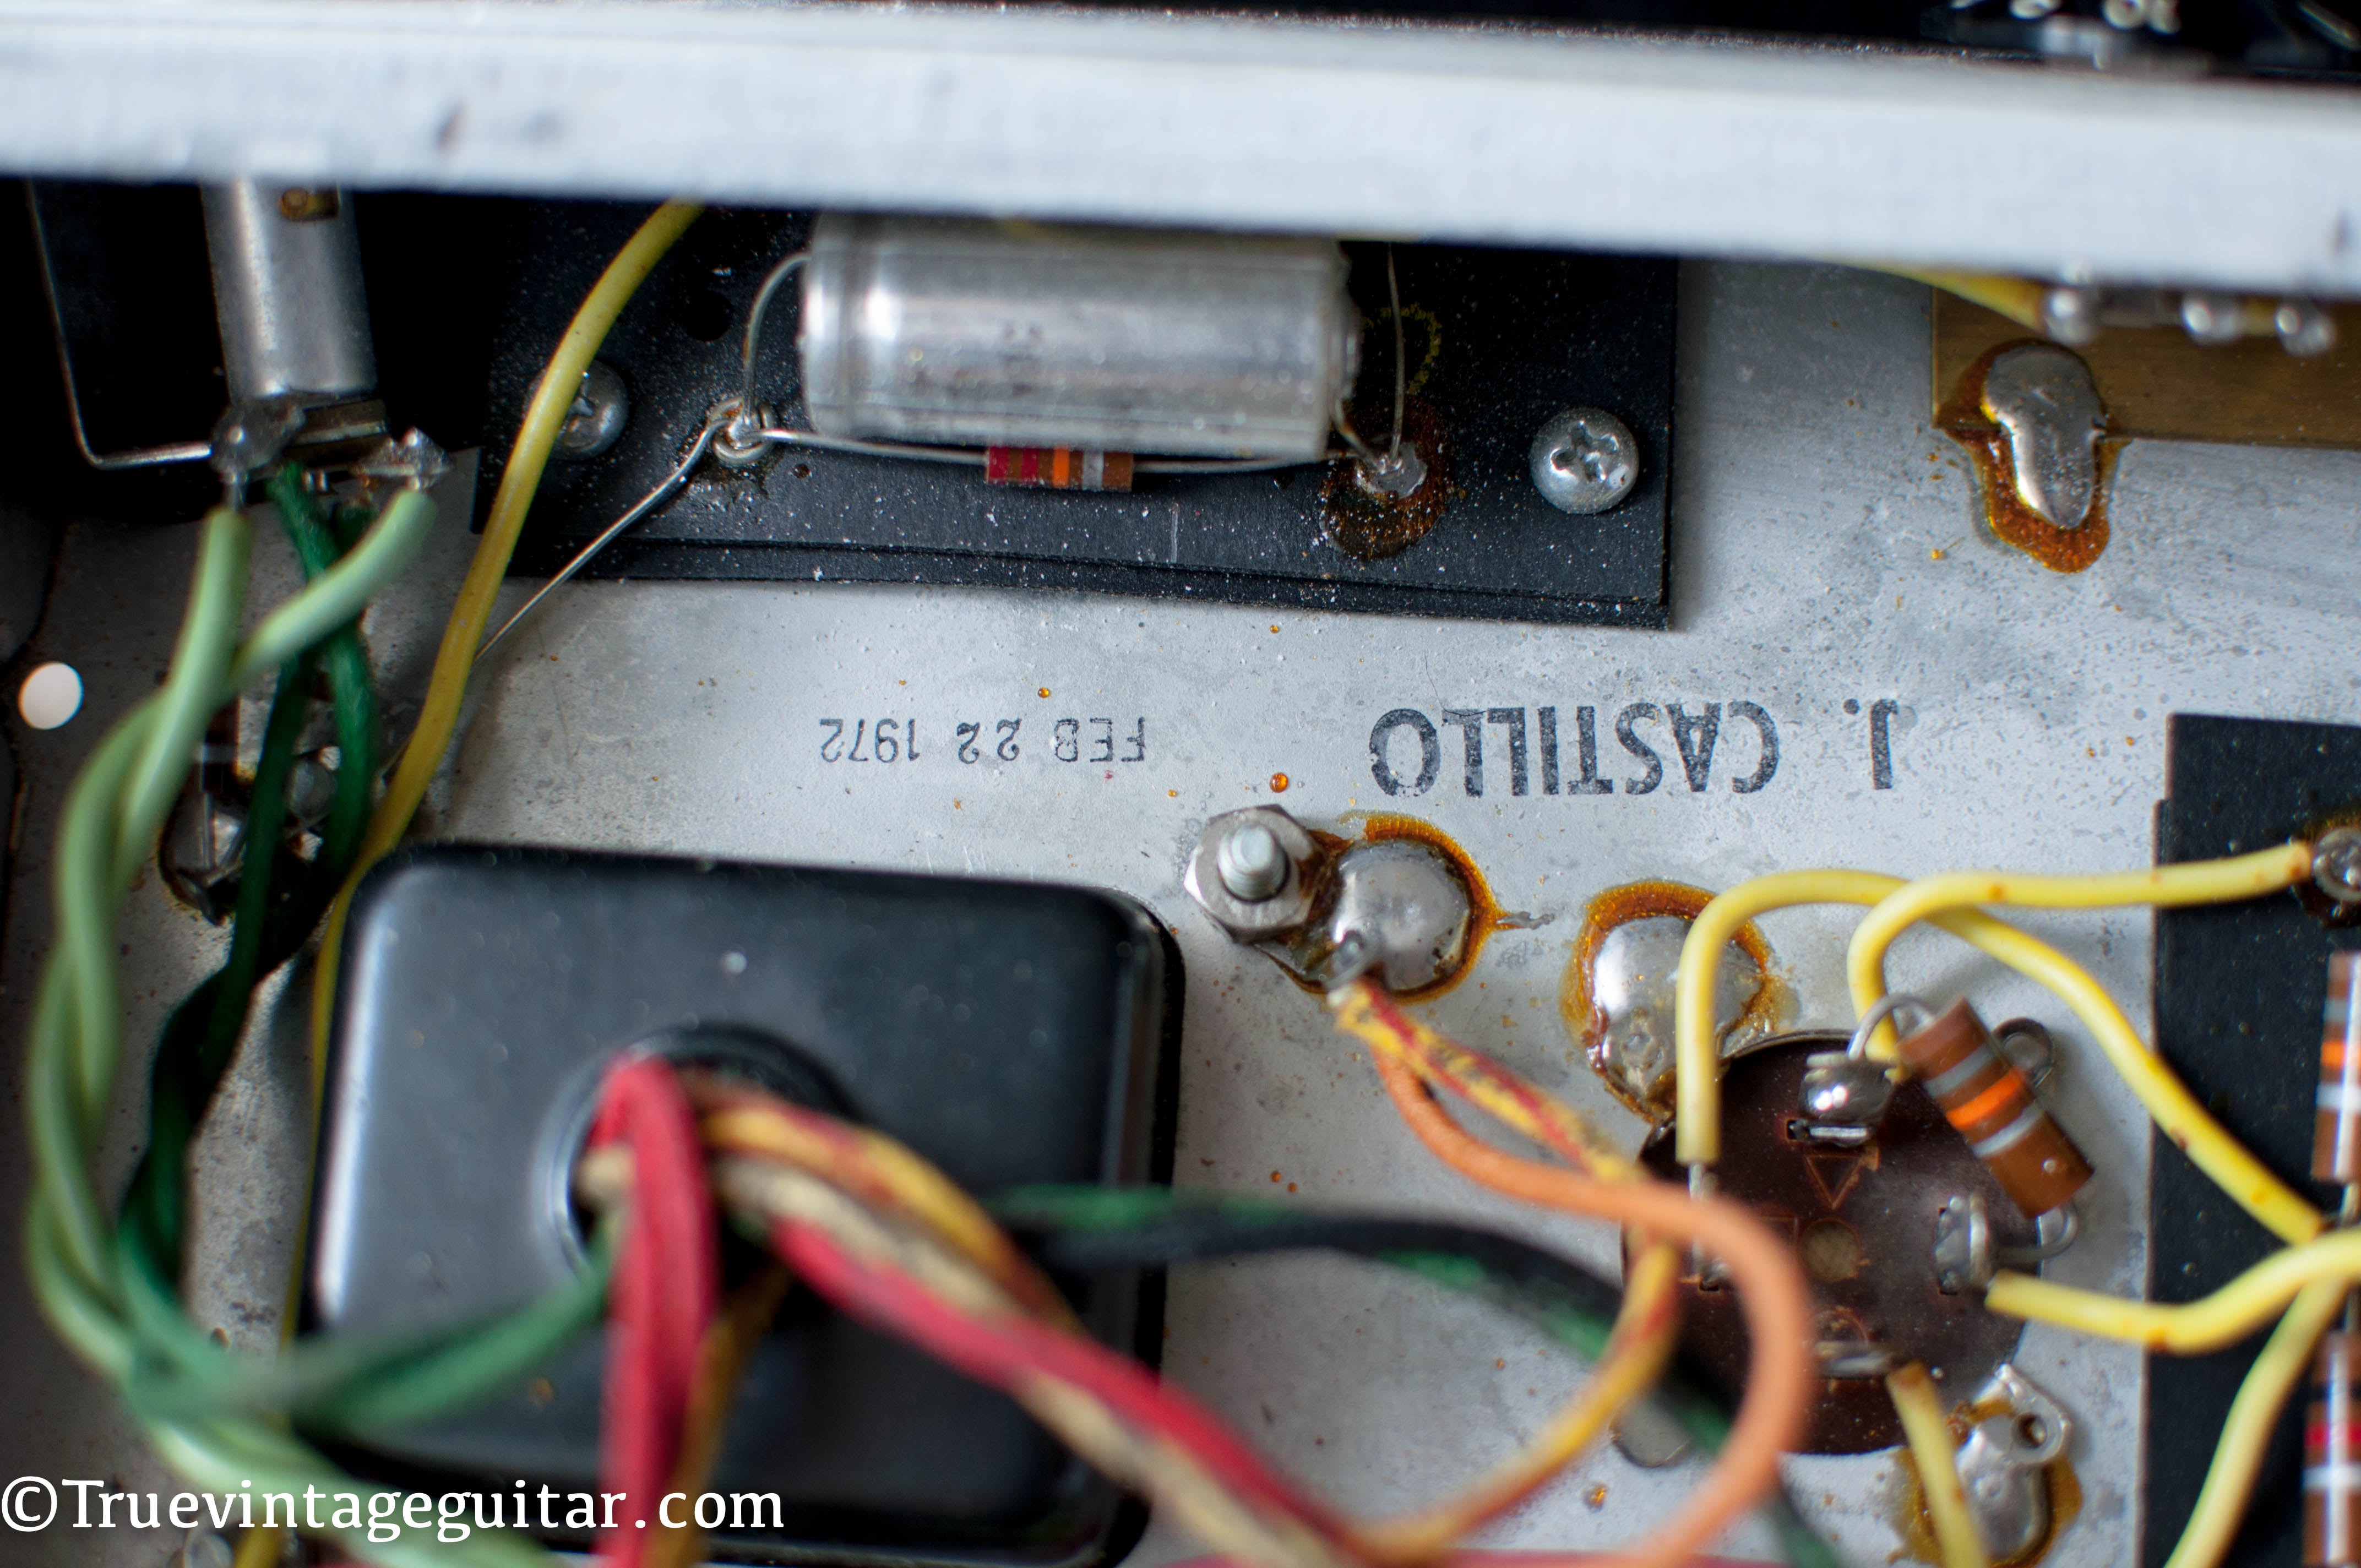 Fender amp chassis date stamp February 22, 1972